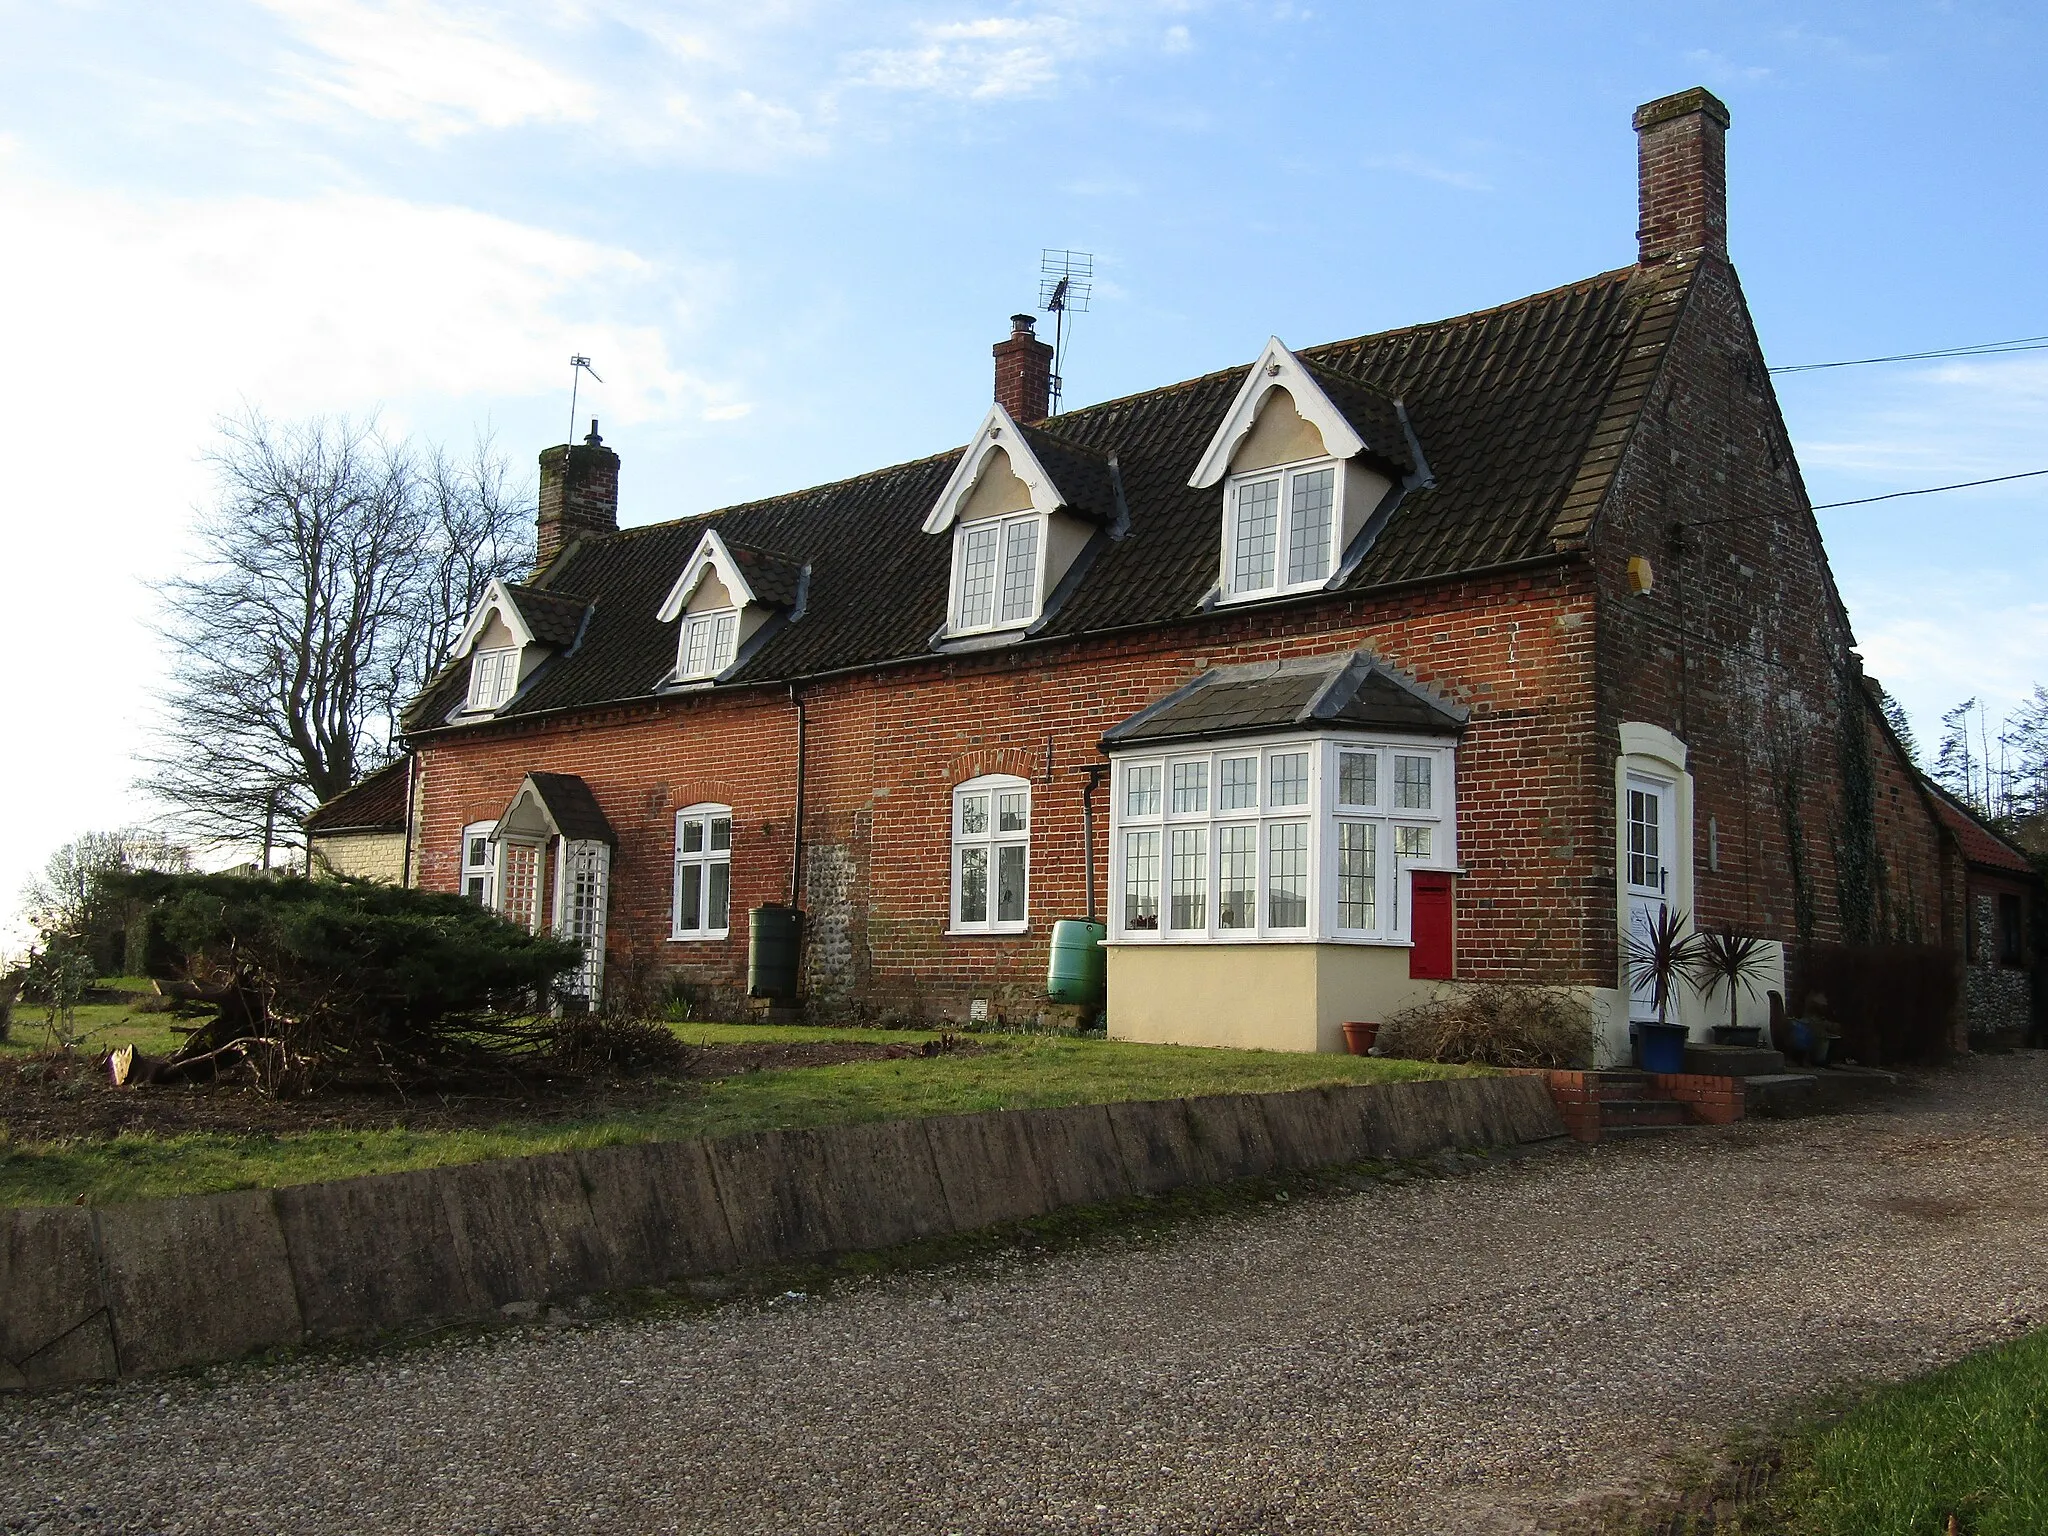 Photo showing: A row of cottages on the south west side of the village green in the village of Thorpe Market, Norfolk, England.